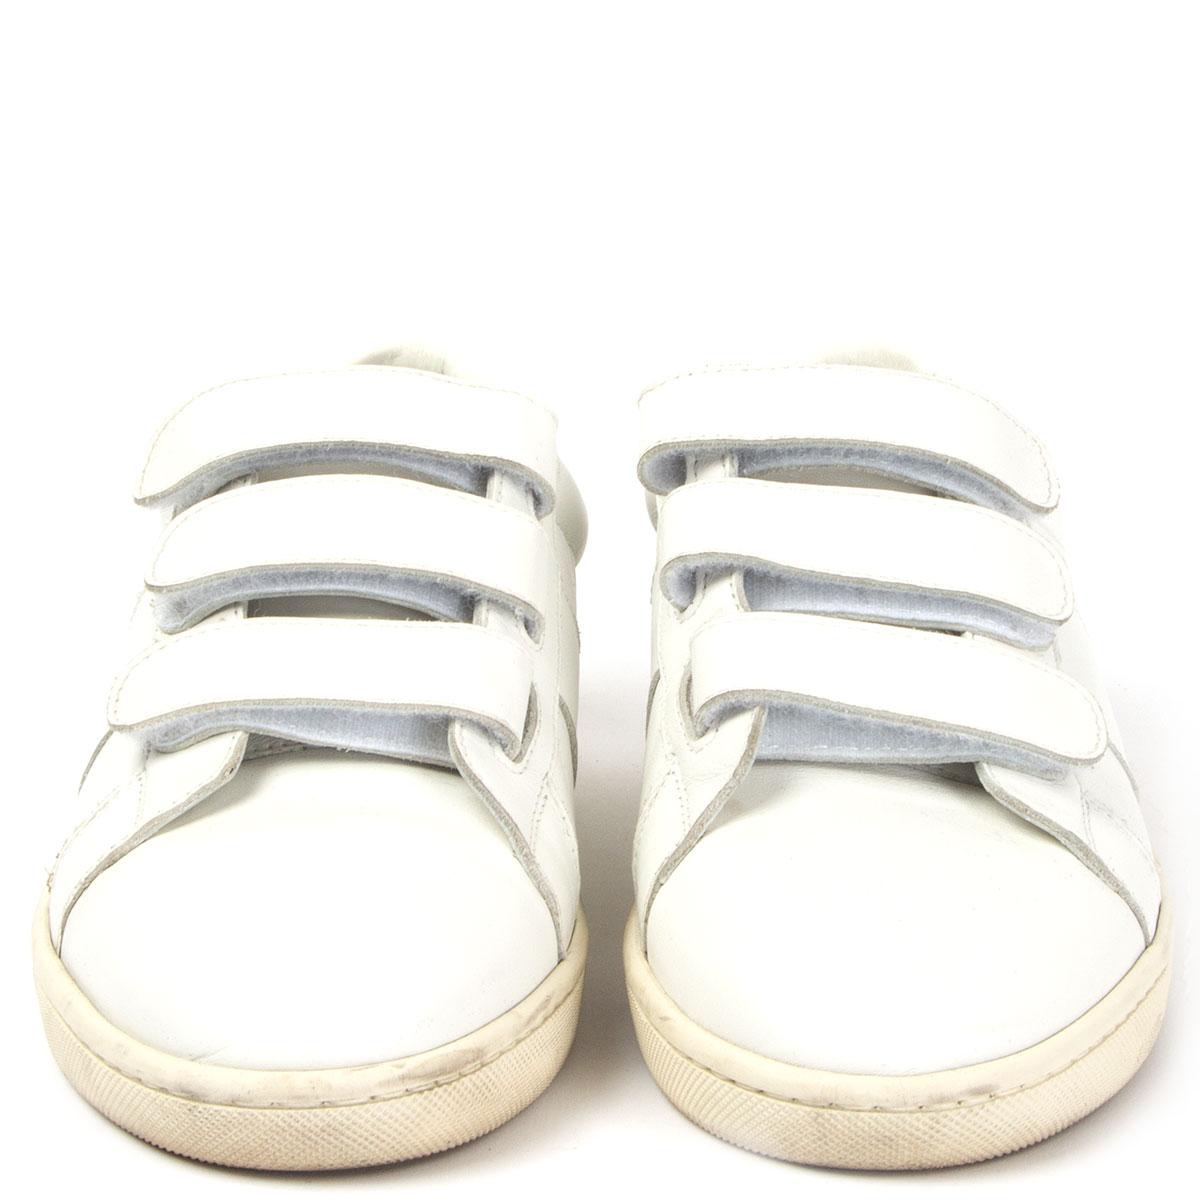 100% authentic Saint Laurent low-top 'Court Classic' sneakers in white calfskin with three velcro fasteners. Contrasting rear tab embossed with gold-tone Saint Laurent. Have been worn and are in excellent condition. Come with dust bag.